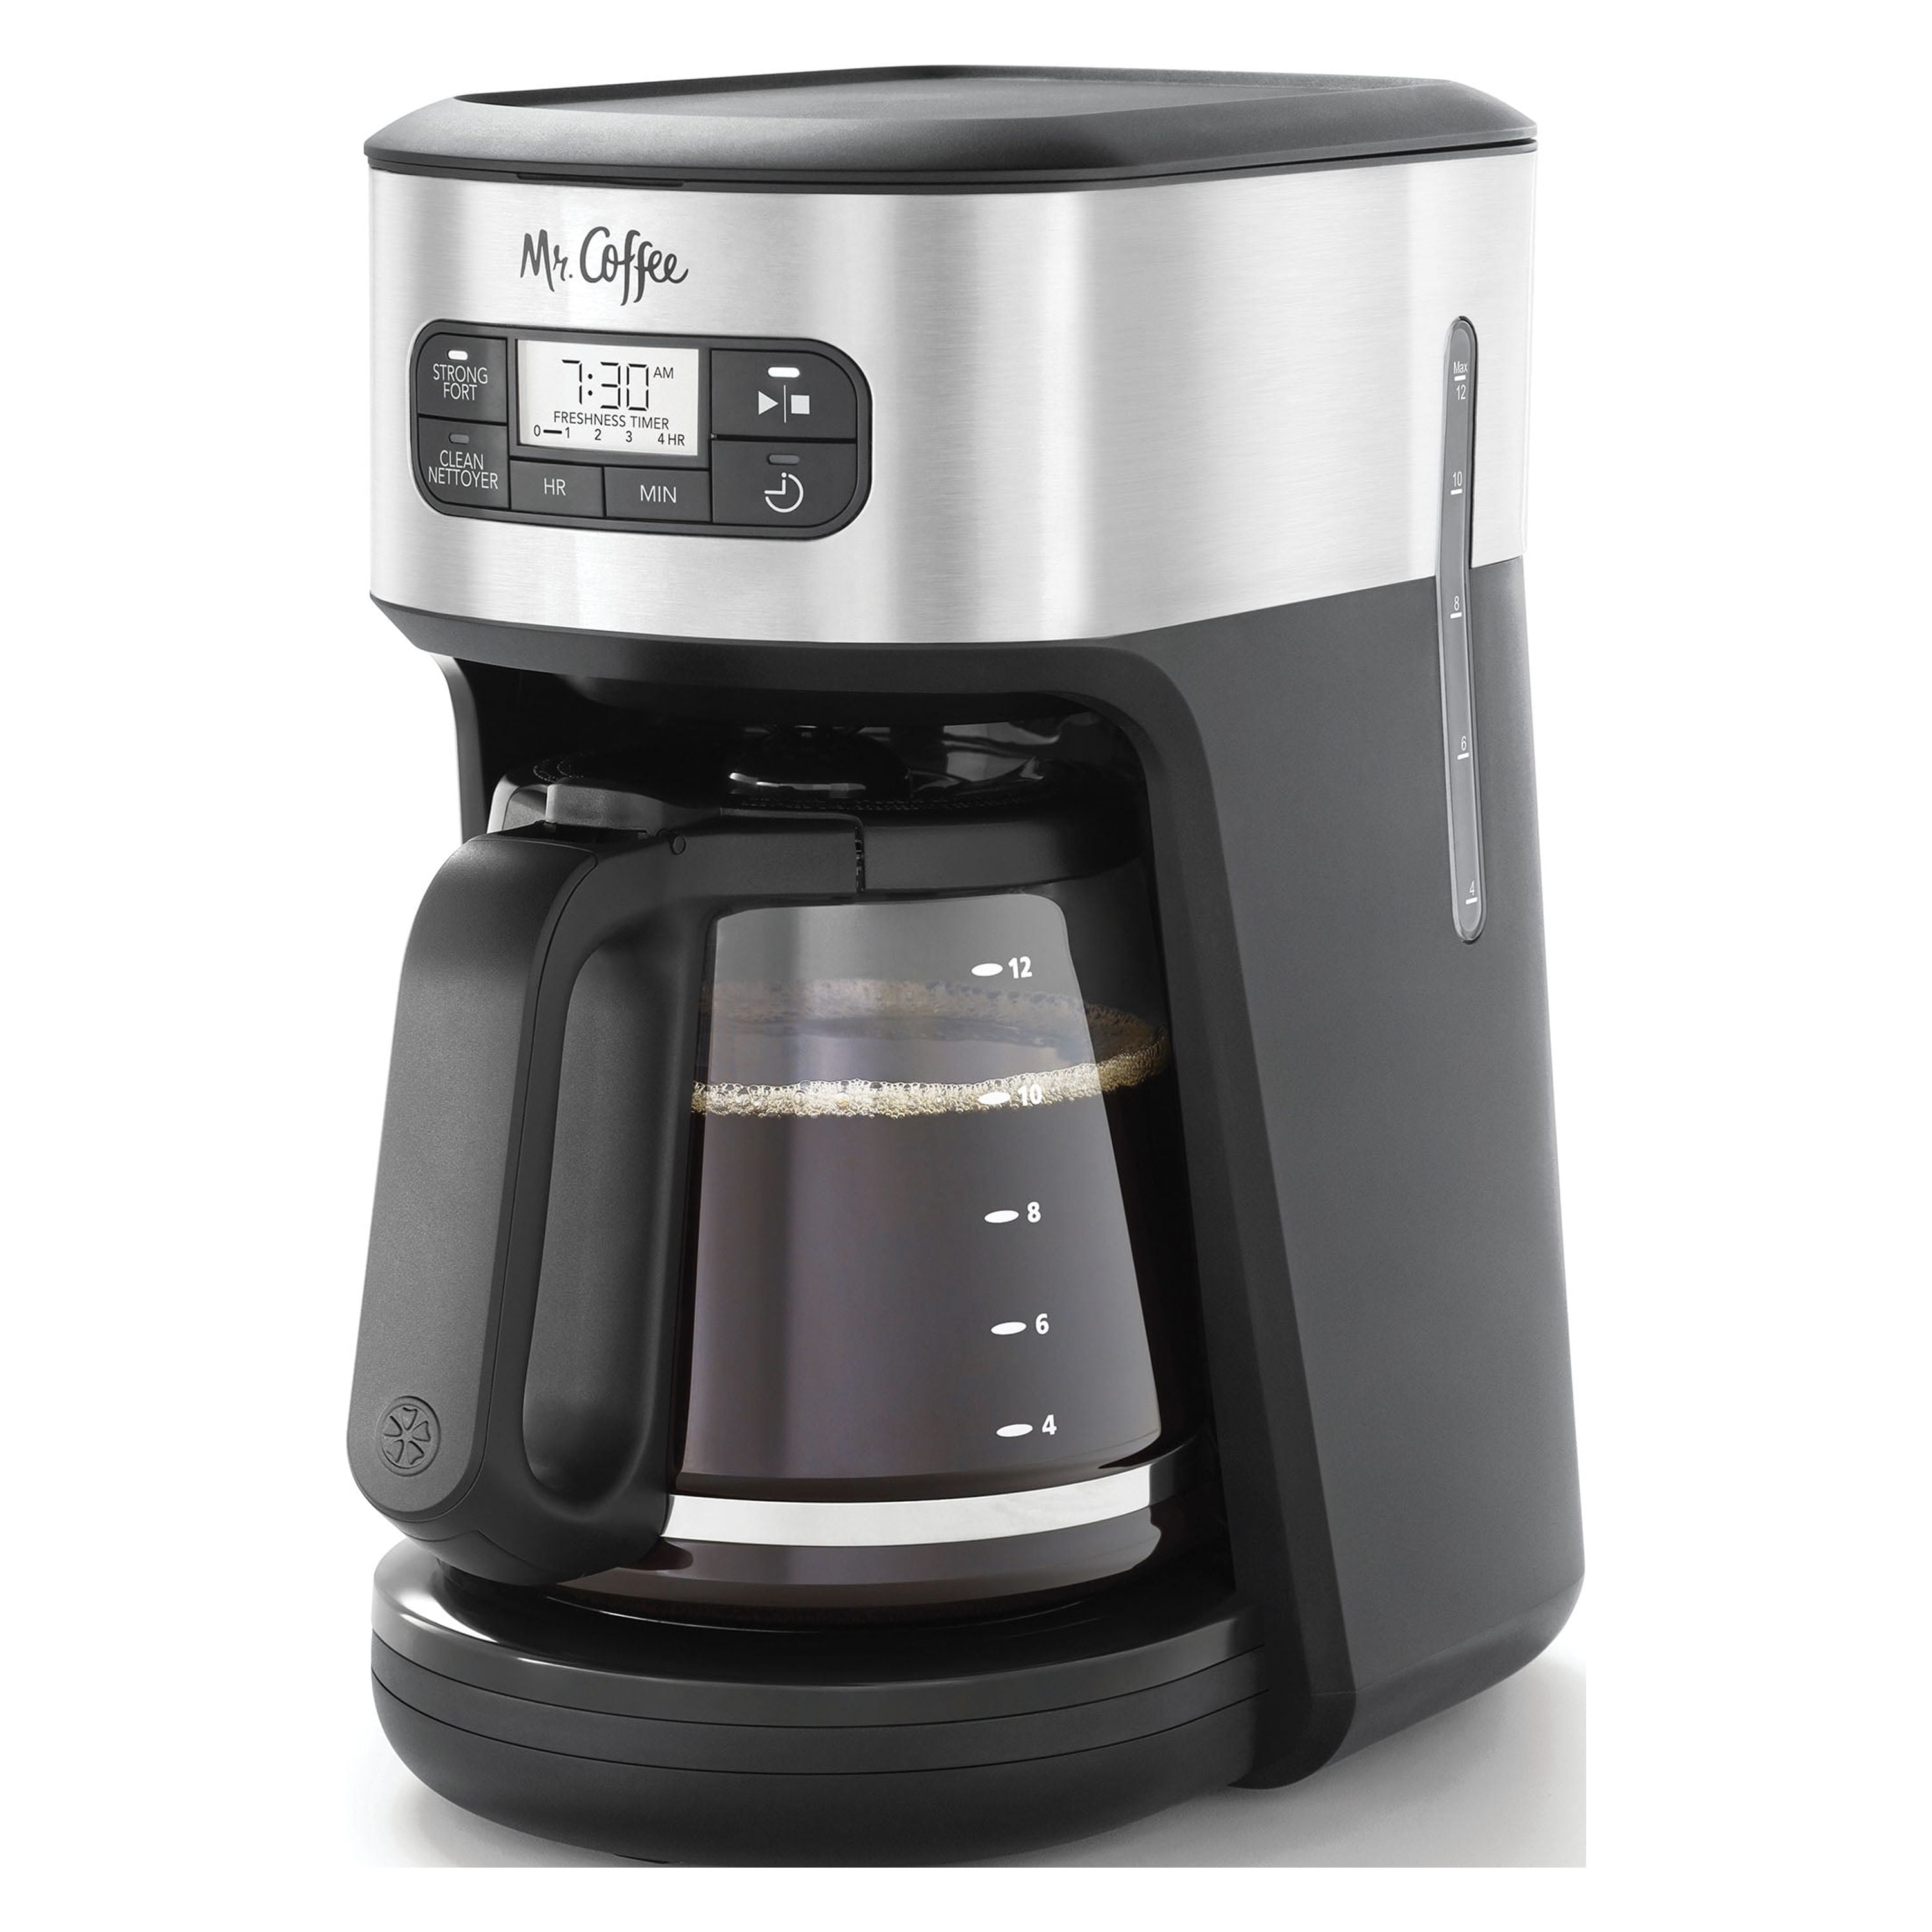 2121121 Mr. Coffee - 12-Cup Coffee Maker with Rapid Brew System